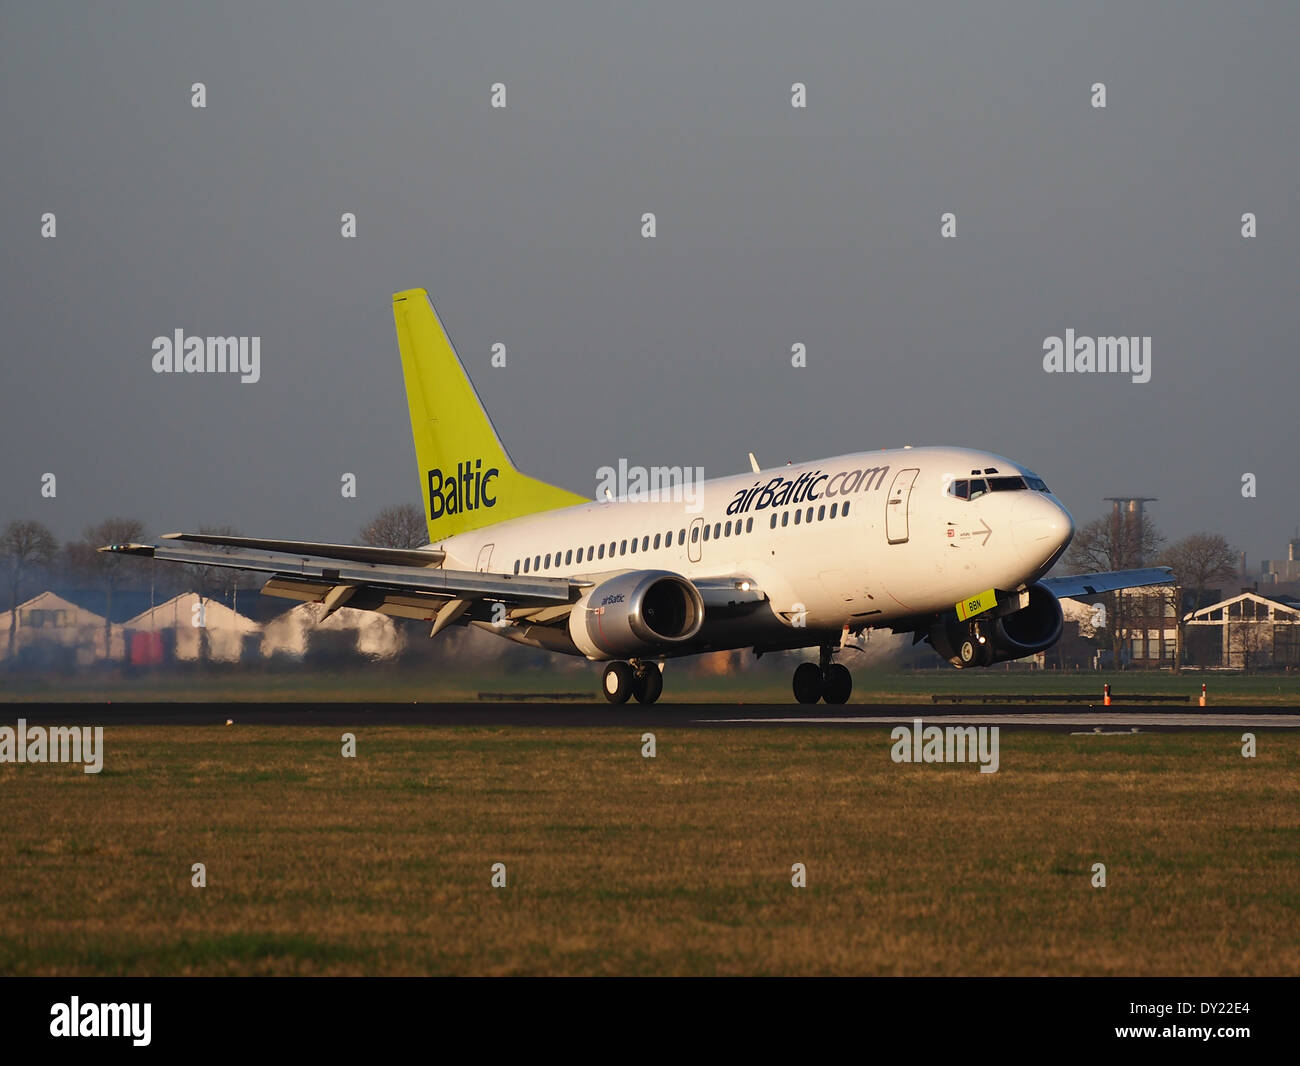 YL-BBN Air Baltic Boeing 737-522 - cn 26683, in atterraggio a AMS (Amsterdam Schiphol), pic2 Foto Stock